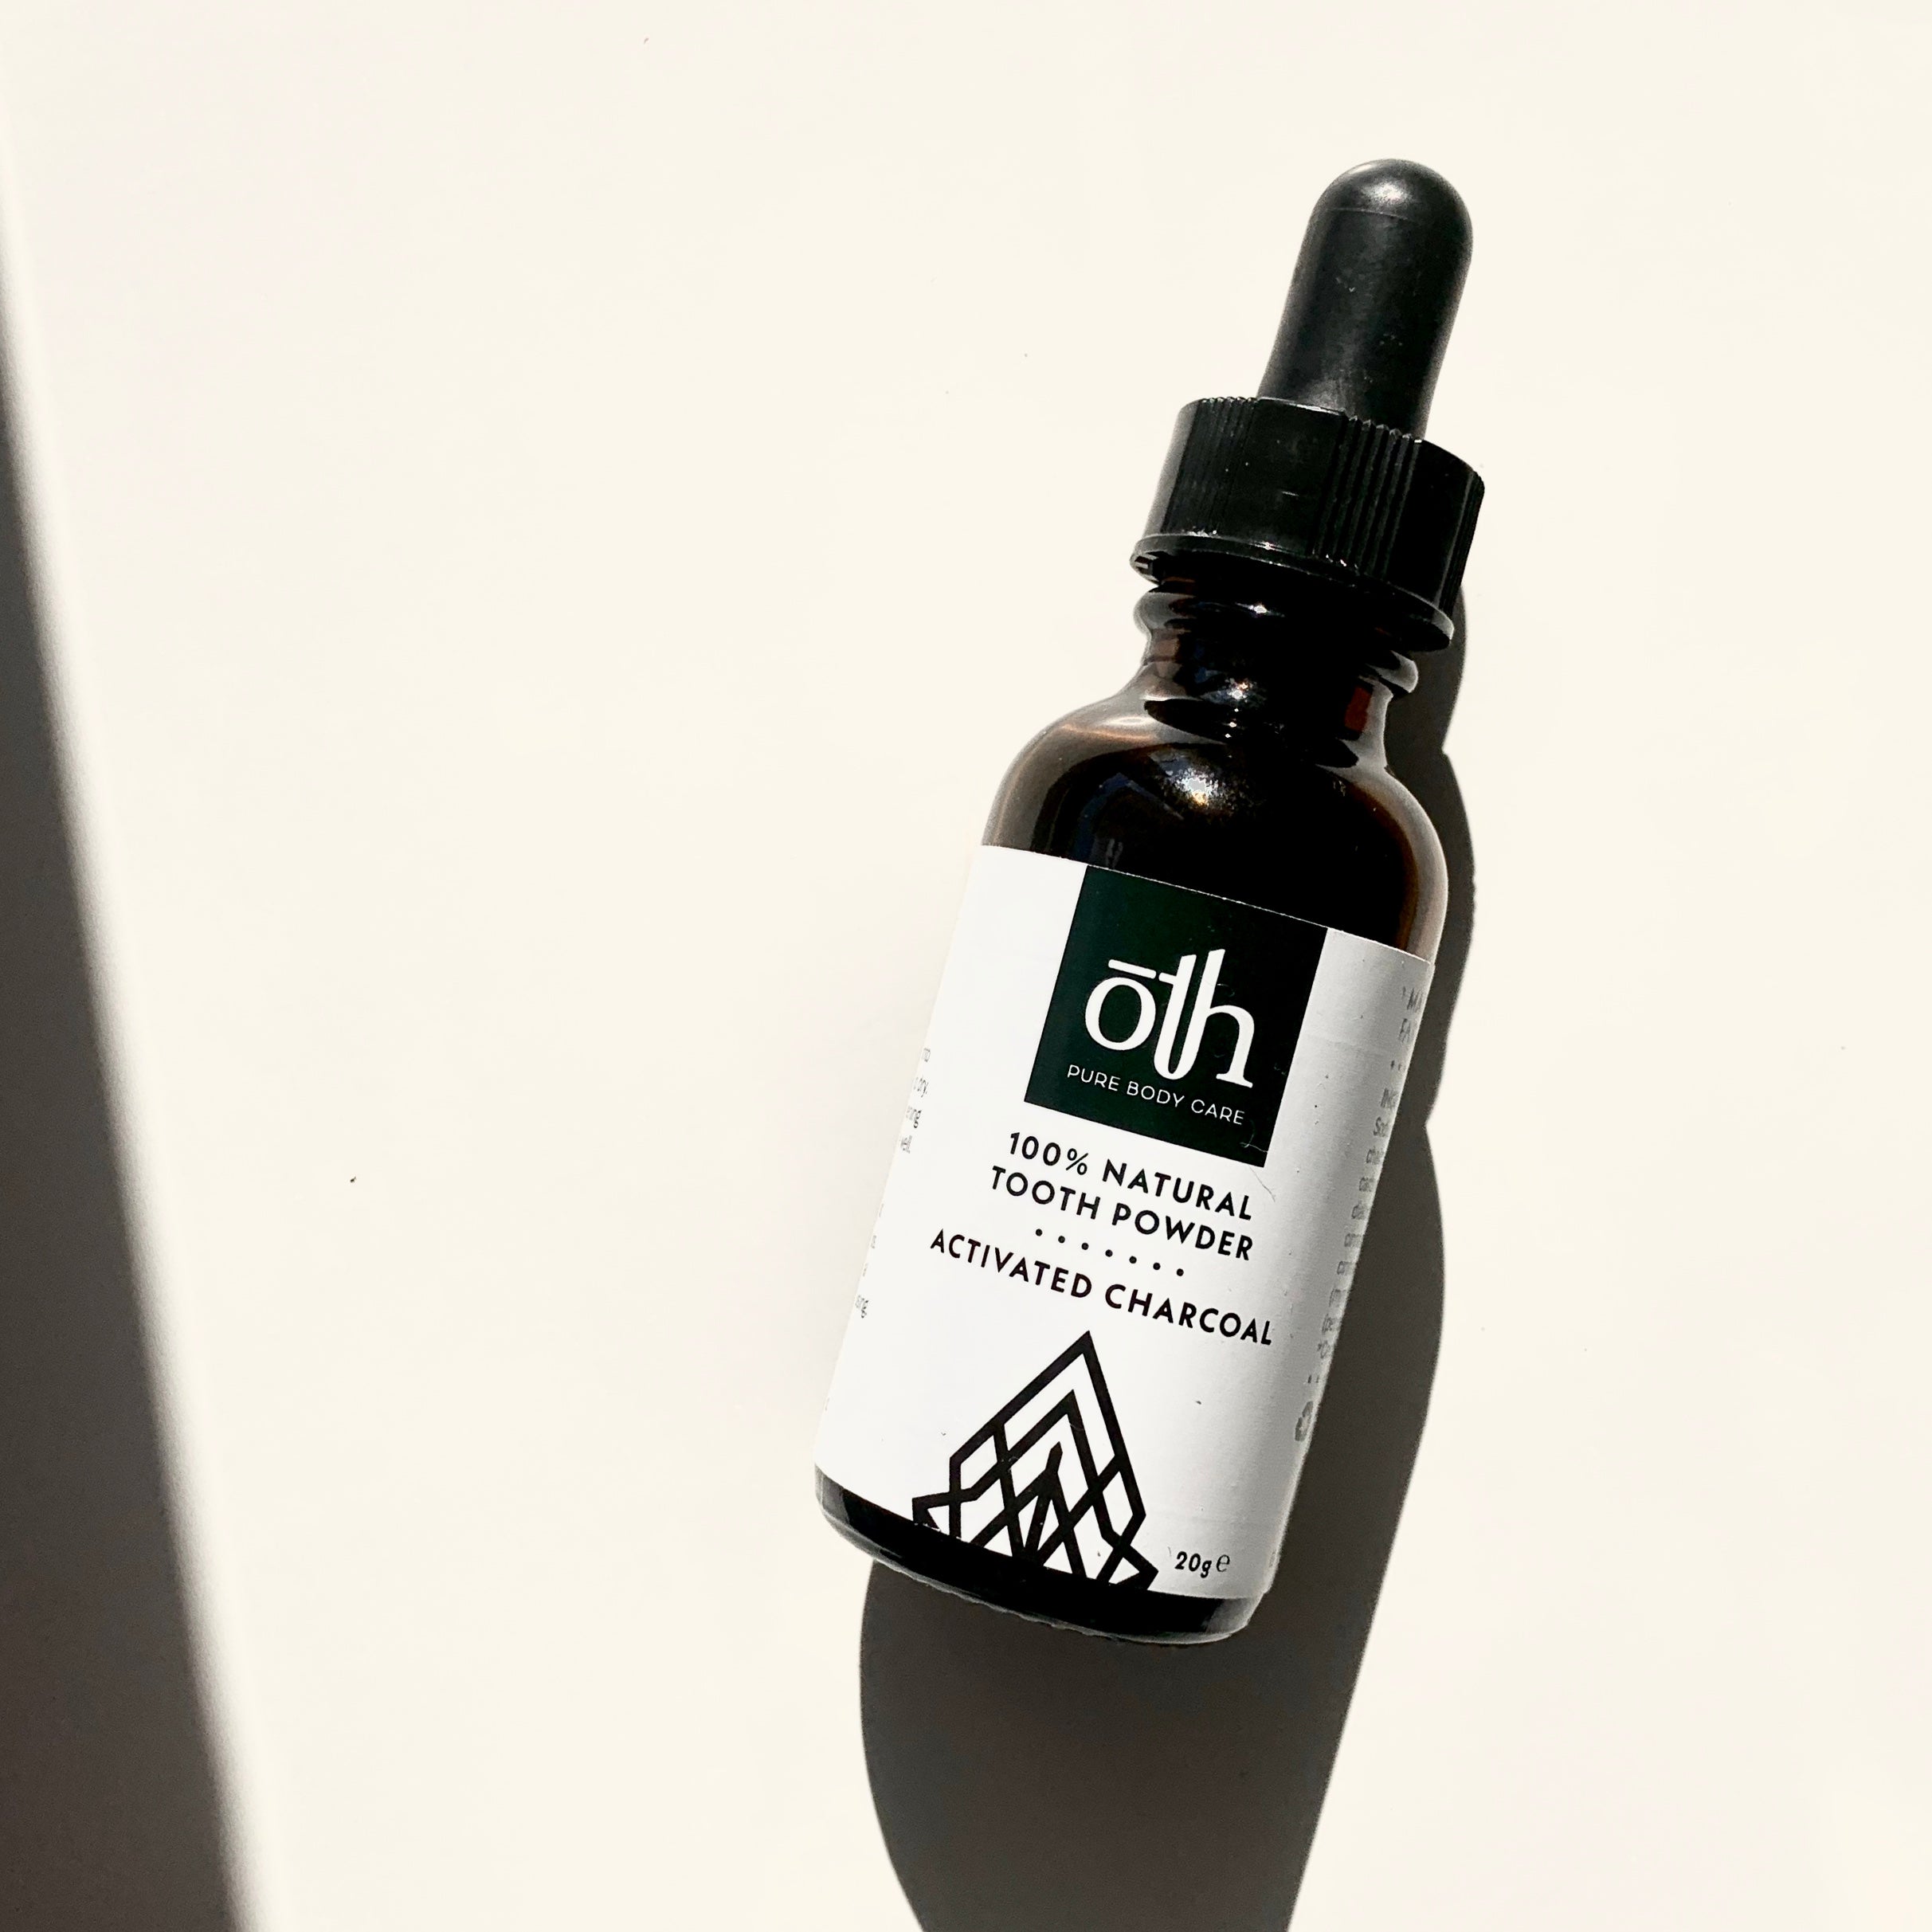 Tooth Powder, Activated Charcoal | Oth